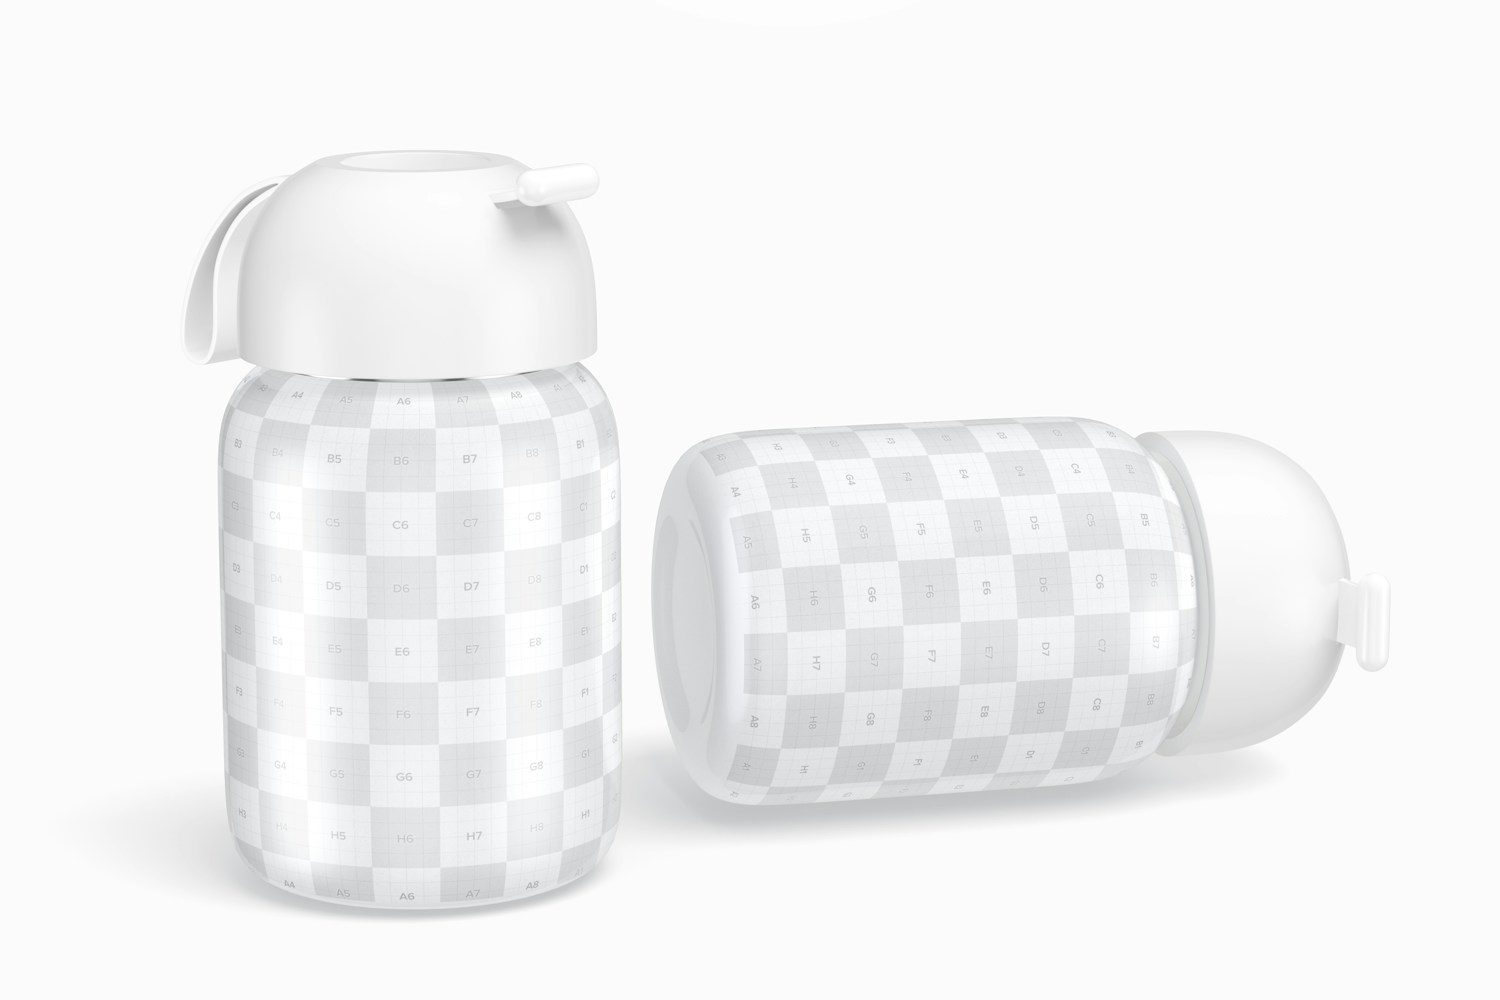 Small Metallic Bottles Mockup, Standing and Dropped